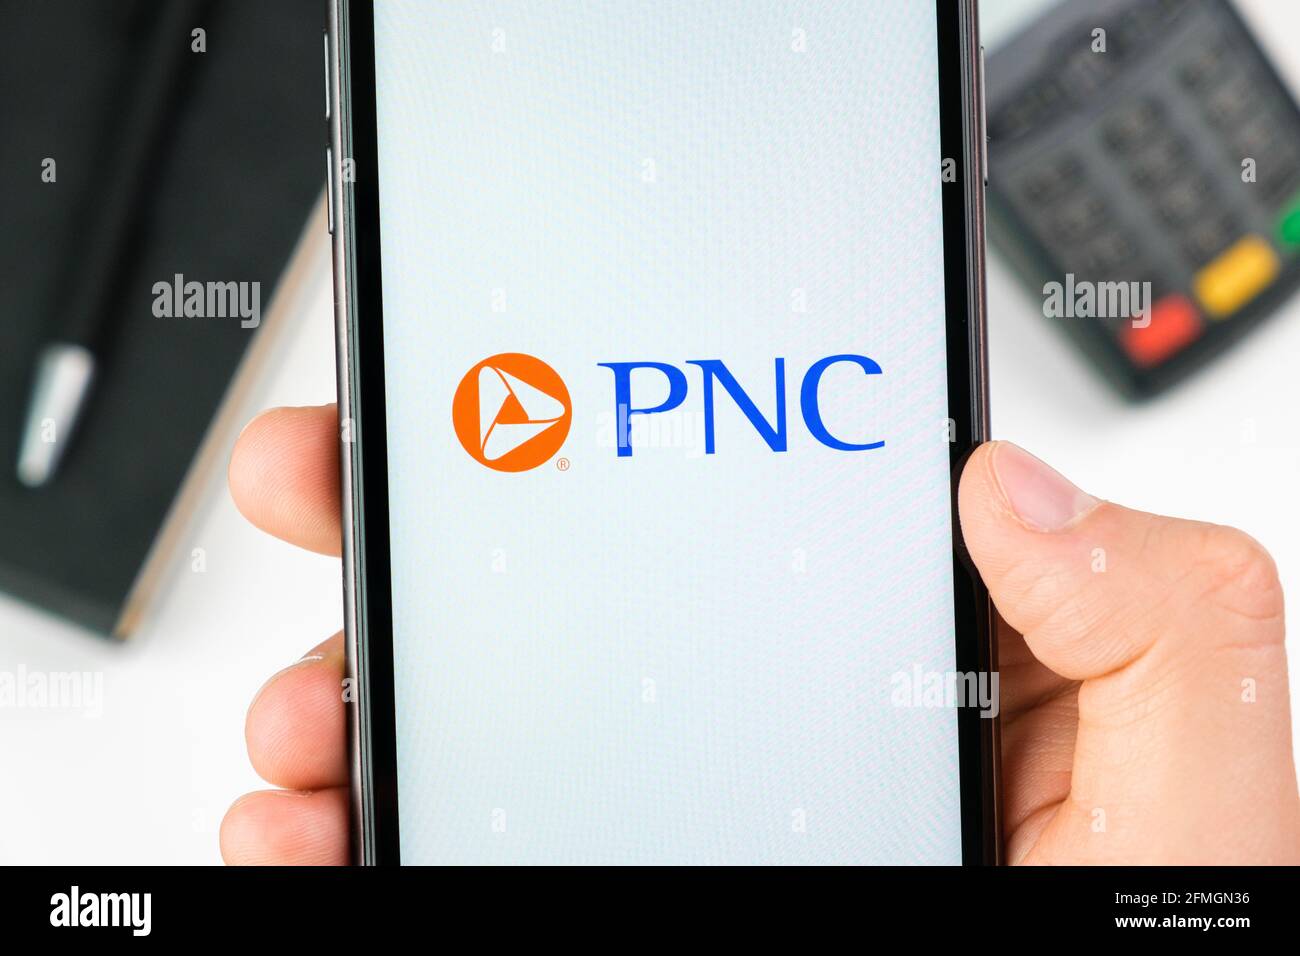 PNC bank logo on the smartphone screen in mans hand on the background of payment terminal, May 2021, San Francisco, USA Stock Photo